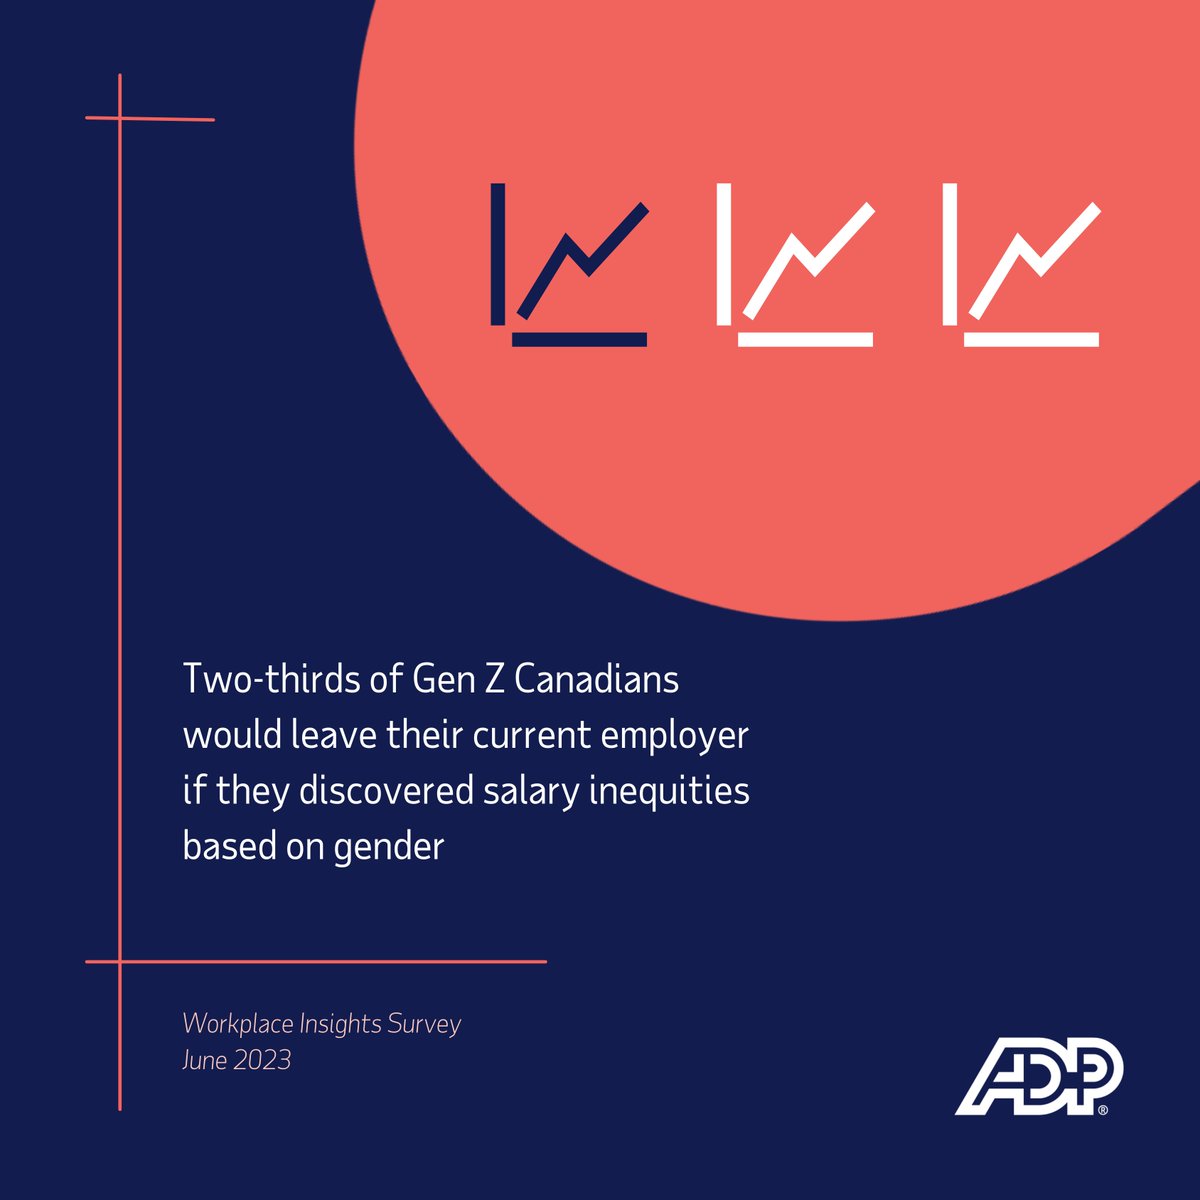 DID YOU KNOW? 
The gender #paygap has a significant impact on #EmployeeRetention. Findings from the ADP's latest survey show that nearly two-thirds of Gen Zs would leave their employer due to unequal pay.    

ow.ly/s5X350OW8RQ   

#genderpaygap #equalpay   #Canada